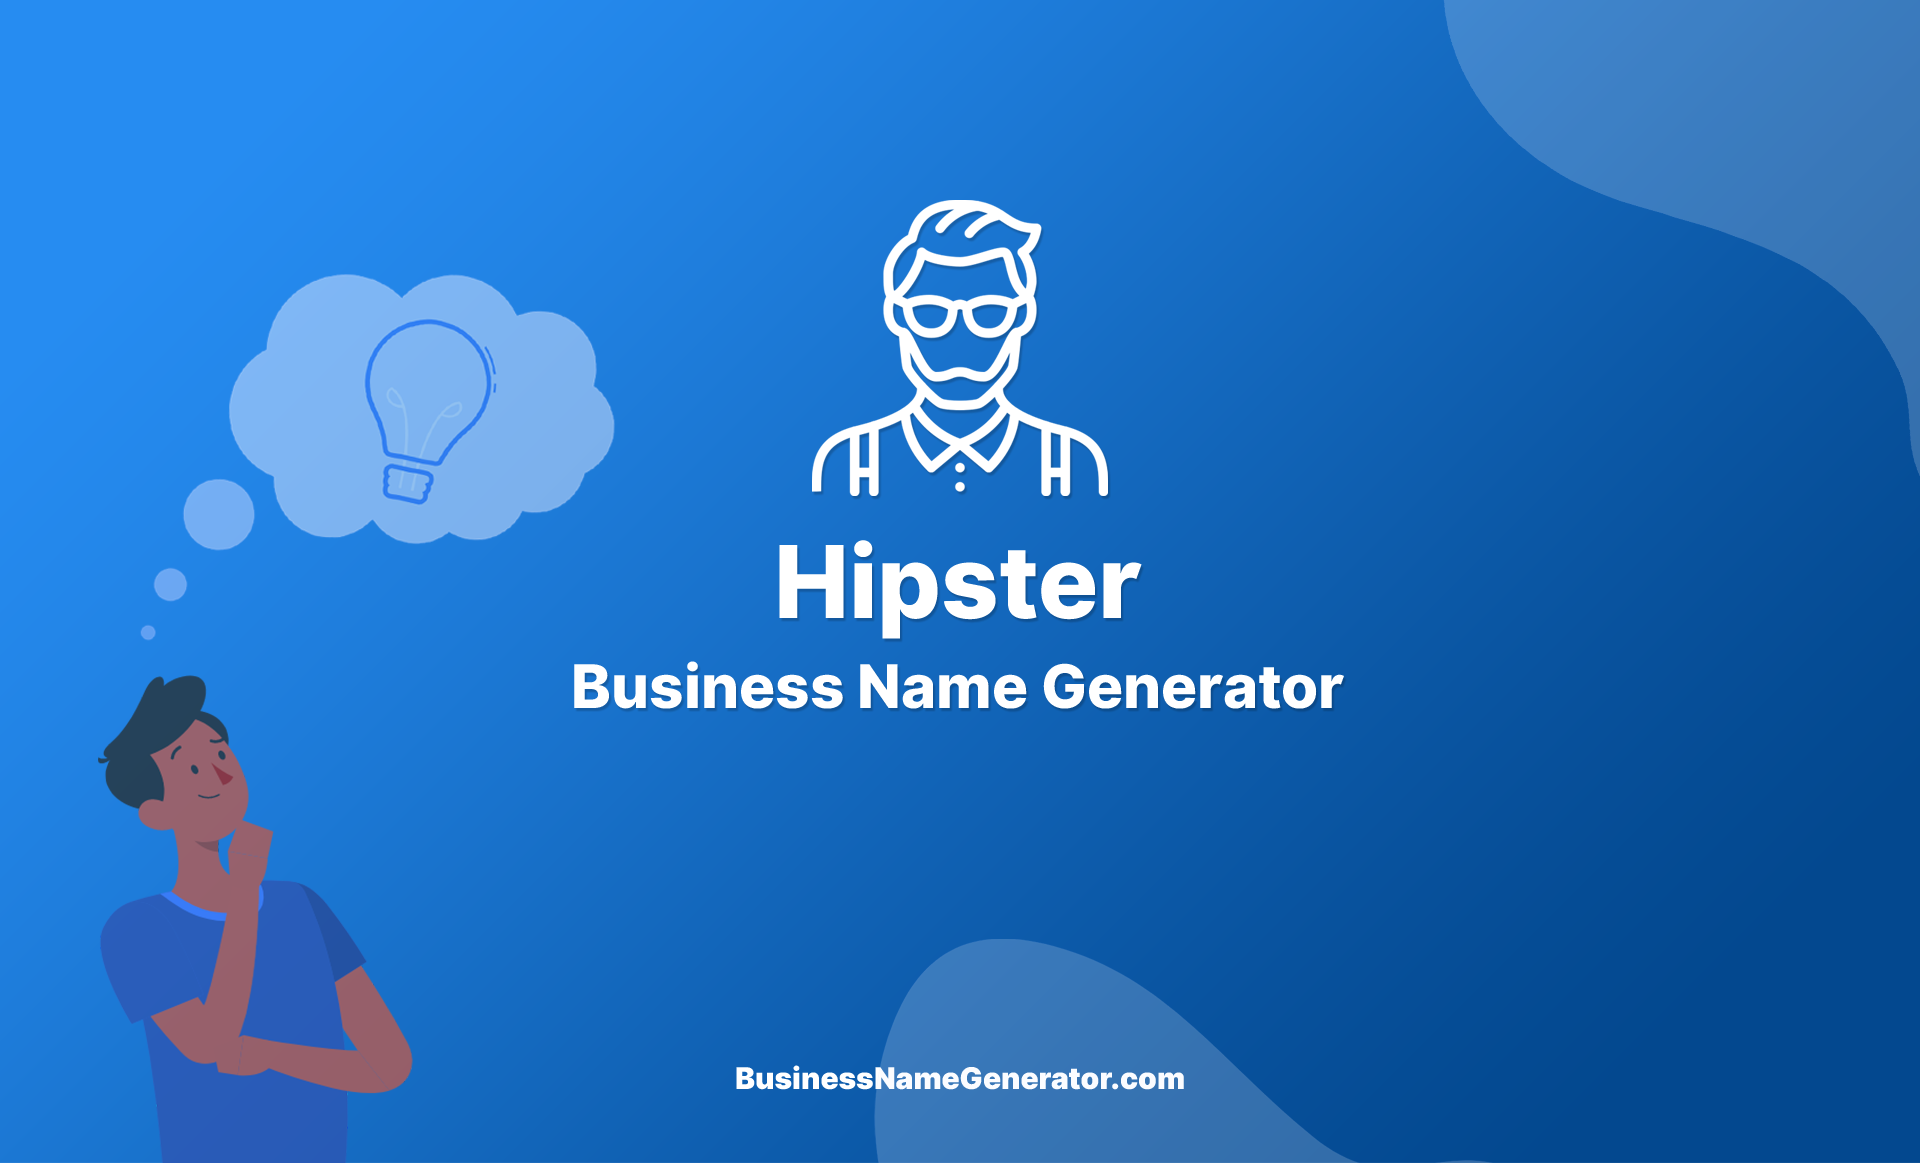 Hipster Business Name Generator Guide & Ideas